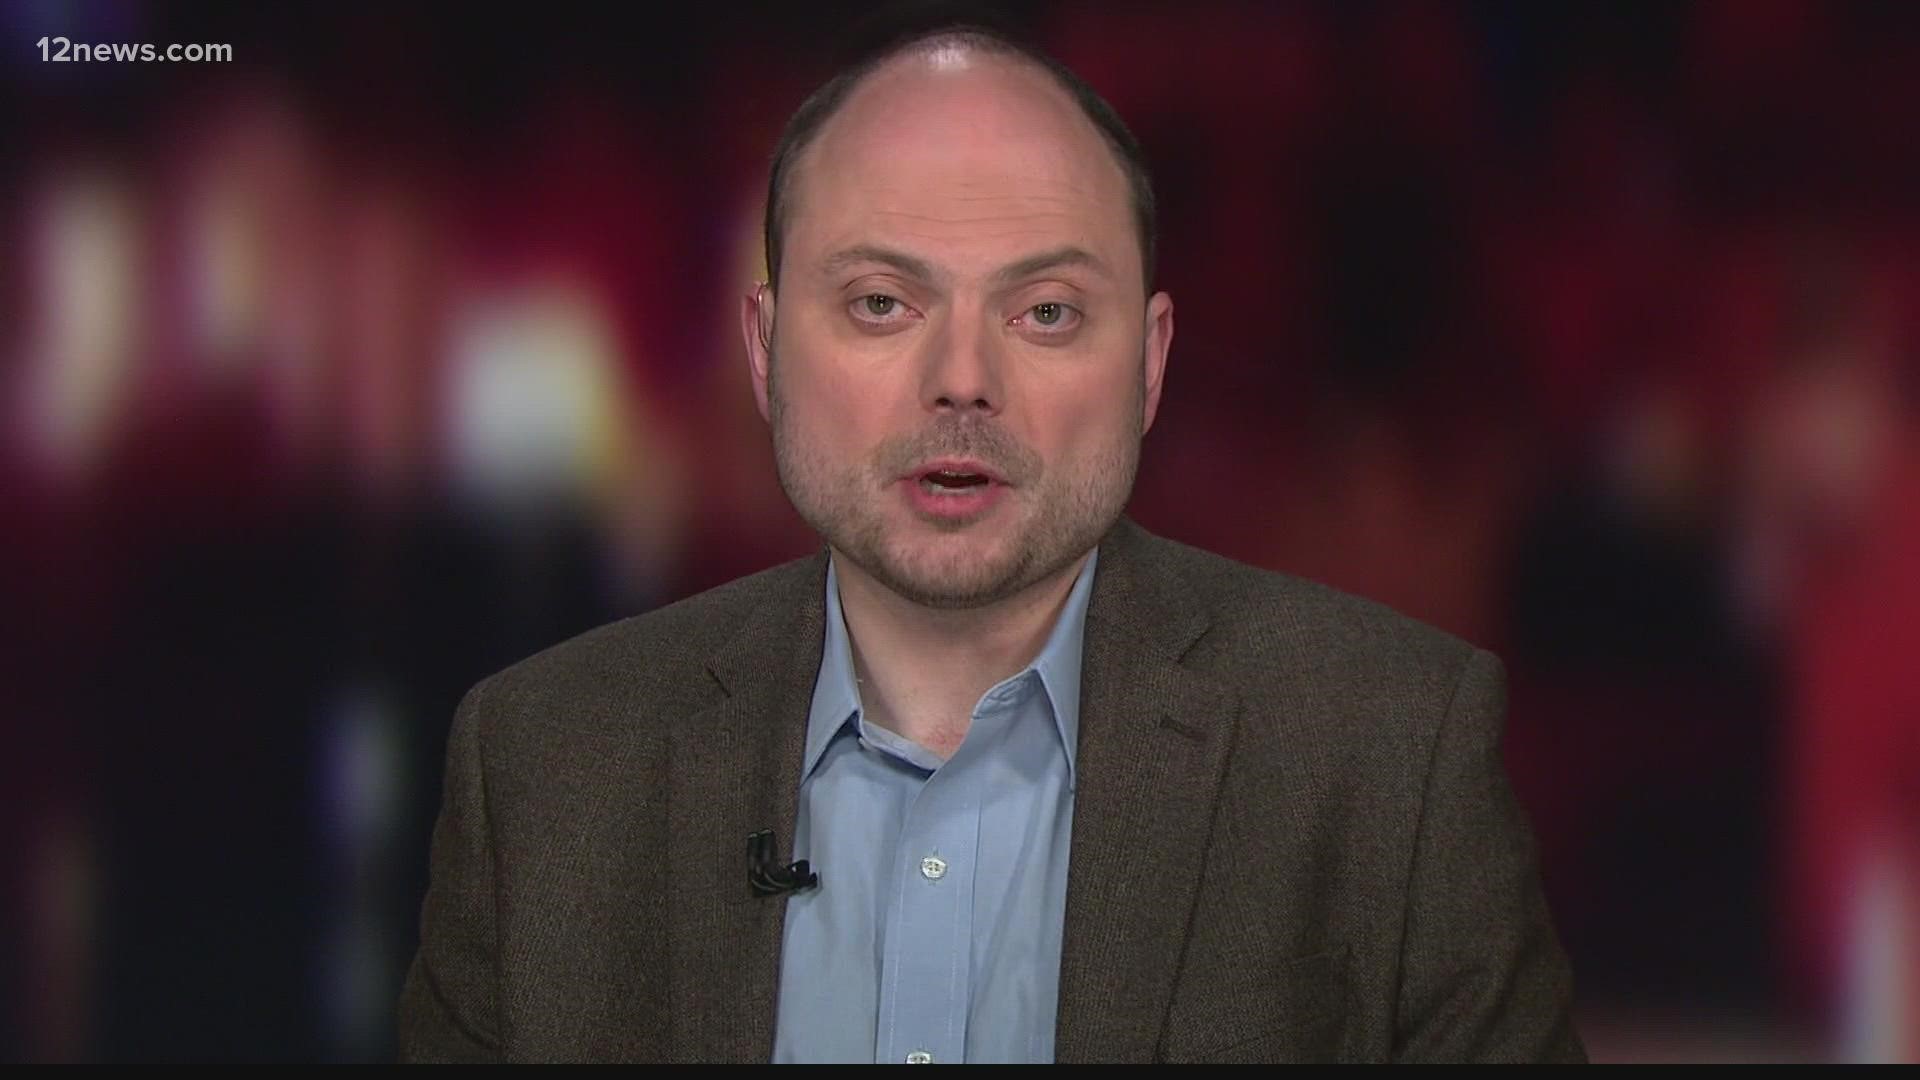 Vladimir Kara-Murza is accused of spreading "false information" at a House of Representatives event in March. He was also a pallbearer at Sen. John McCain's funeral.